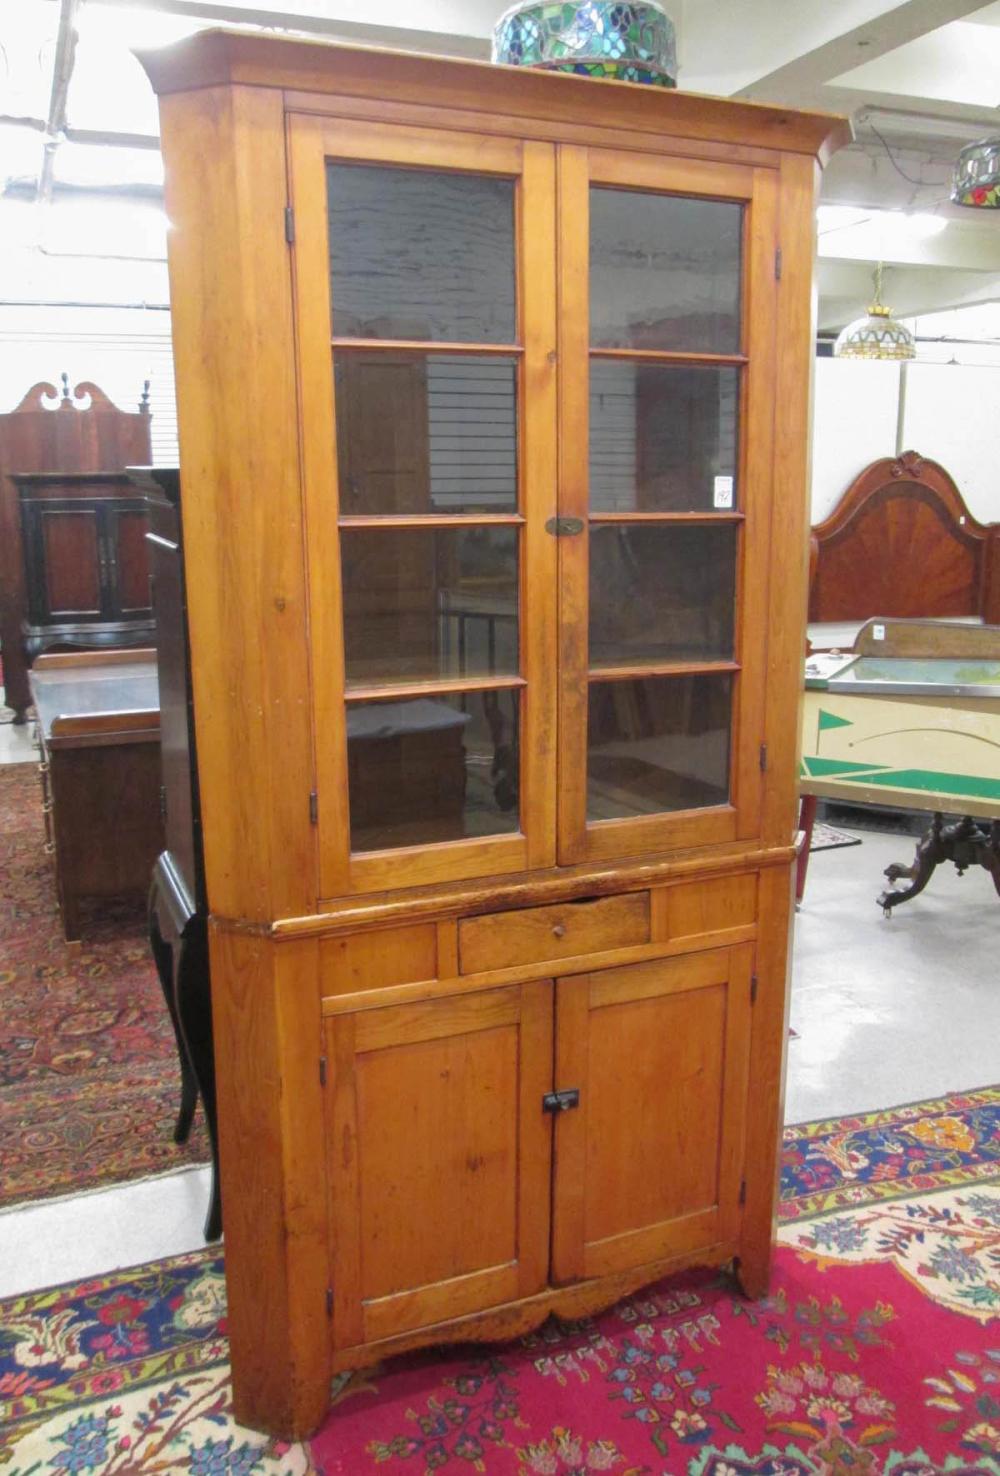 TWO SECTION COUNTRY FURNITURE CORNER 316c7b